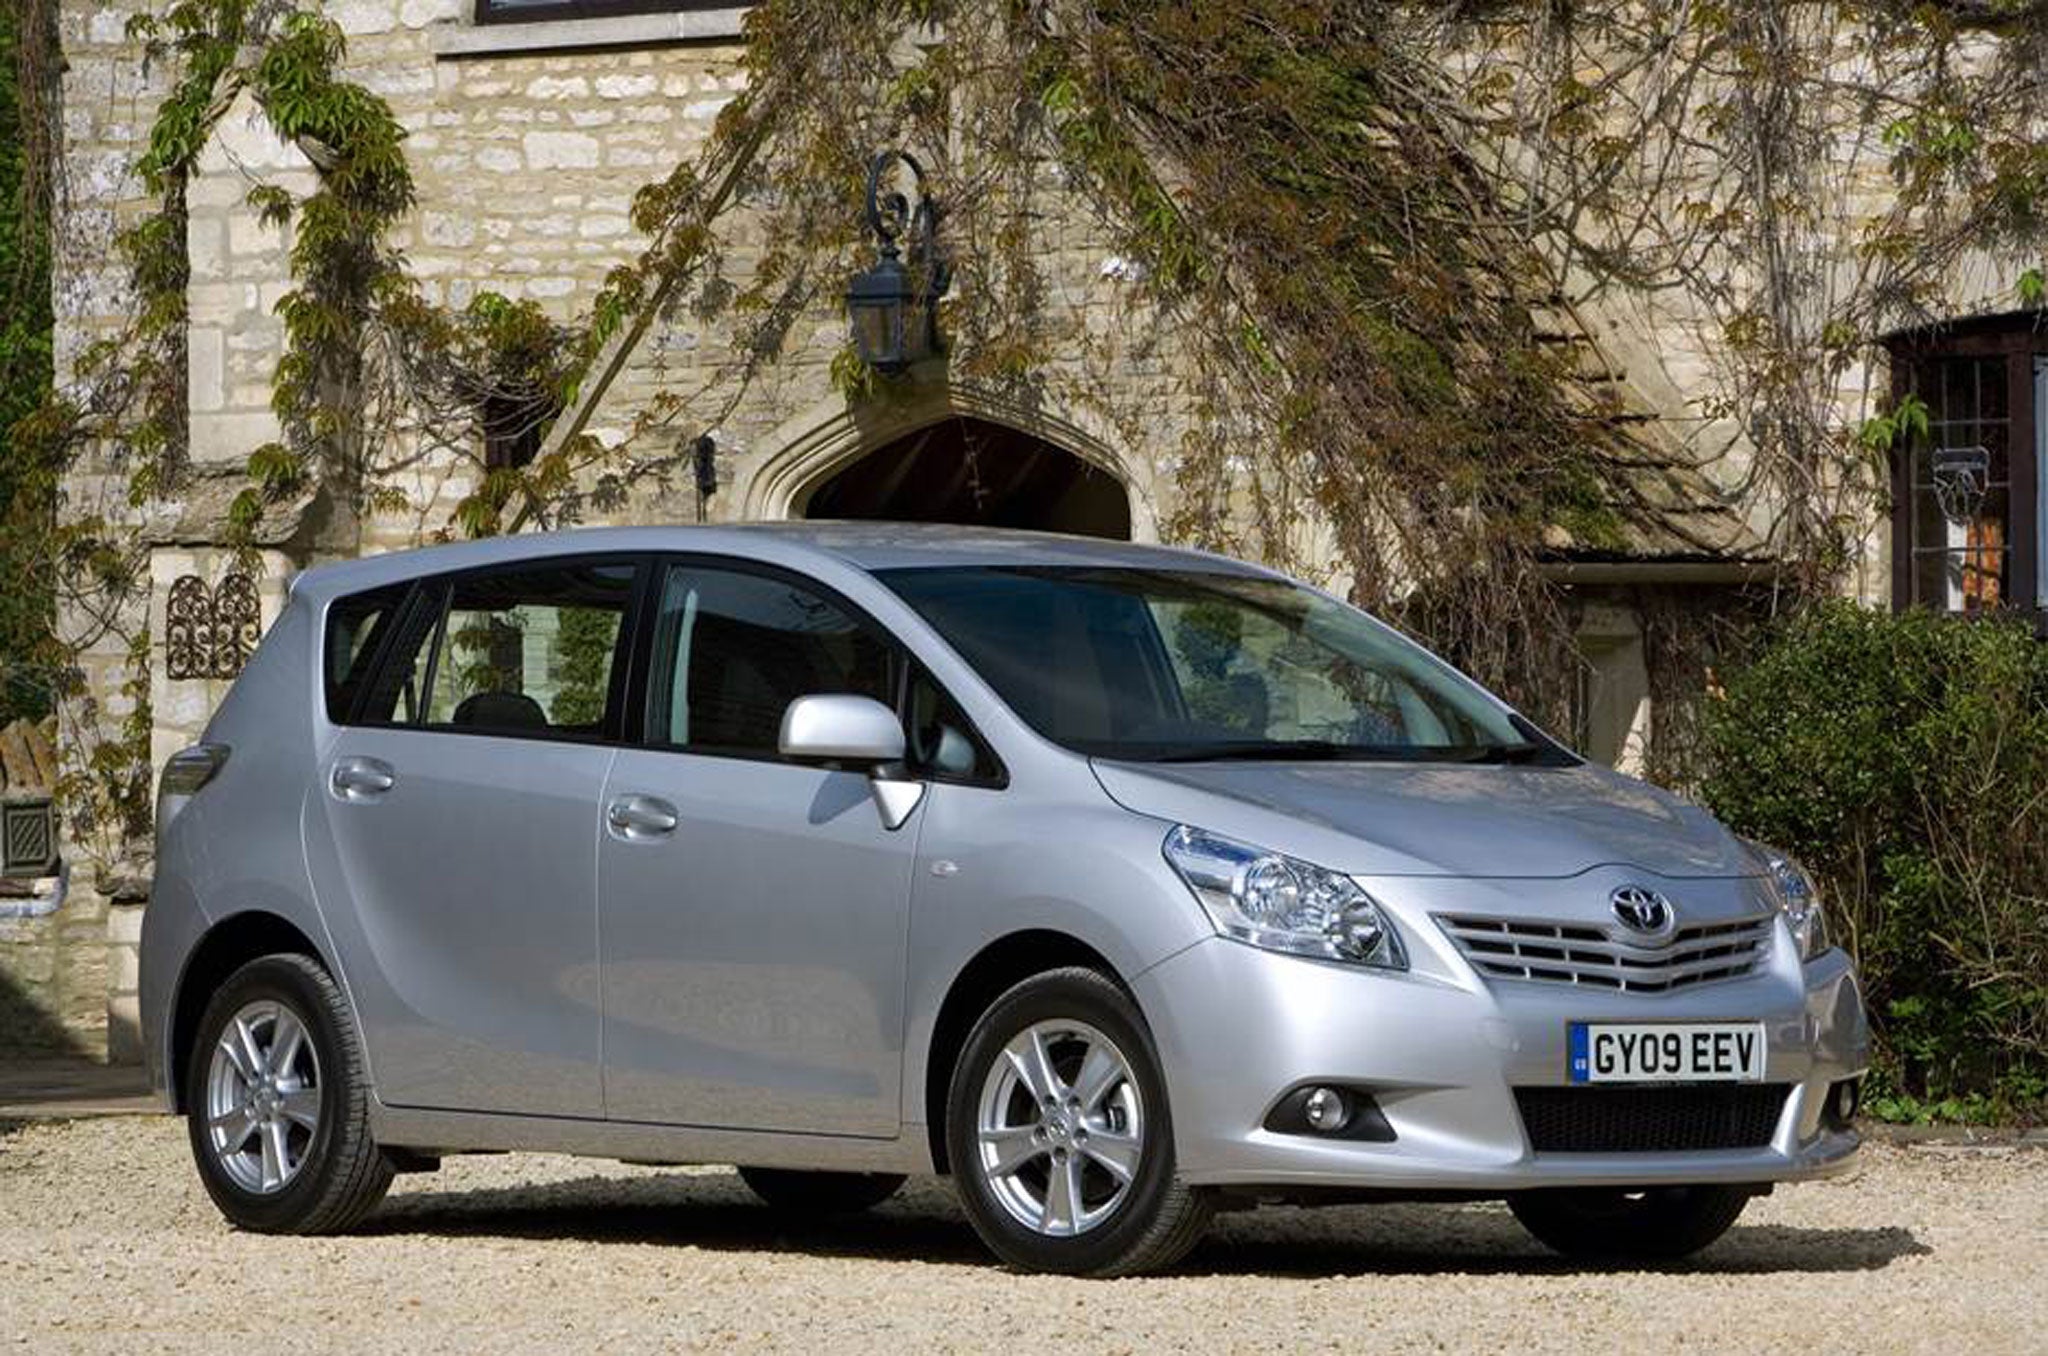 The Toyota Corolla Verso is reliable and spacious